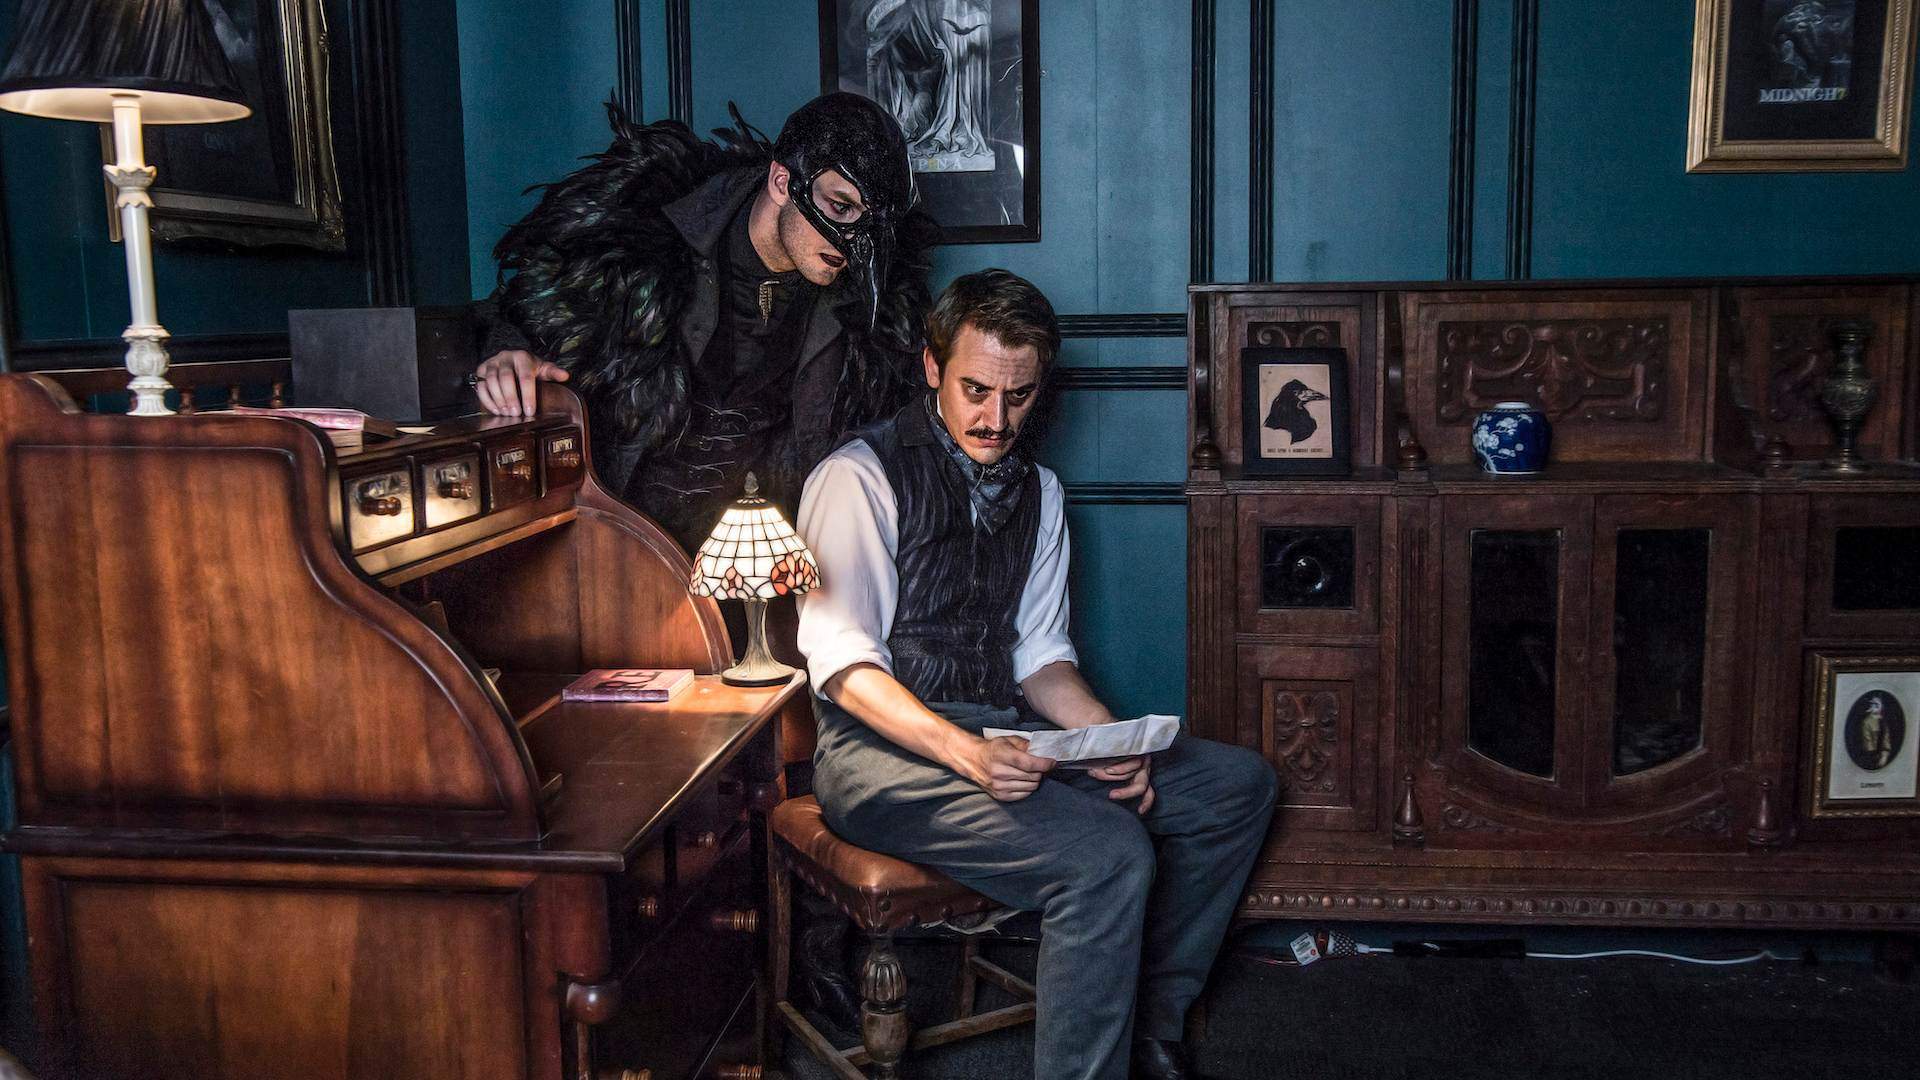 We're Giving Away Double Passes to This Immersive Theatre Experience